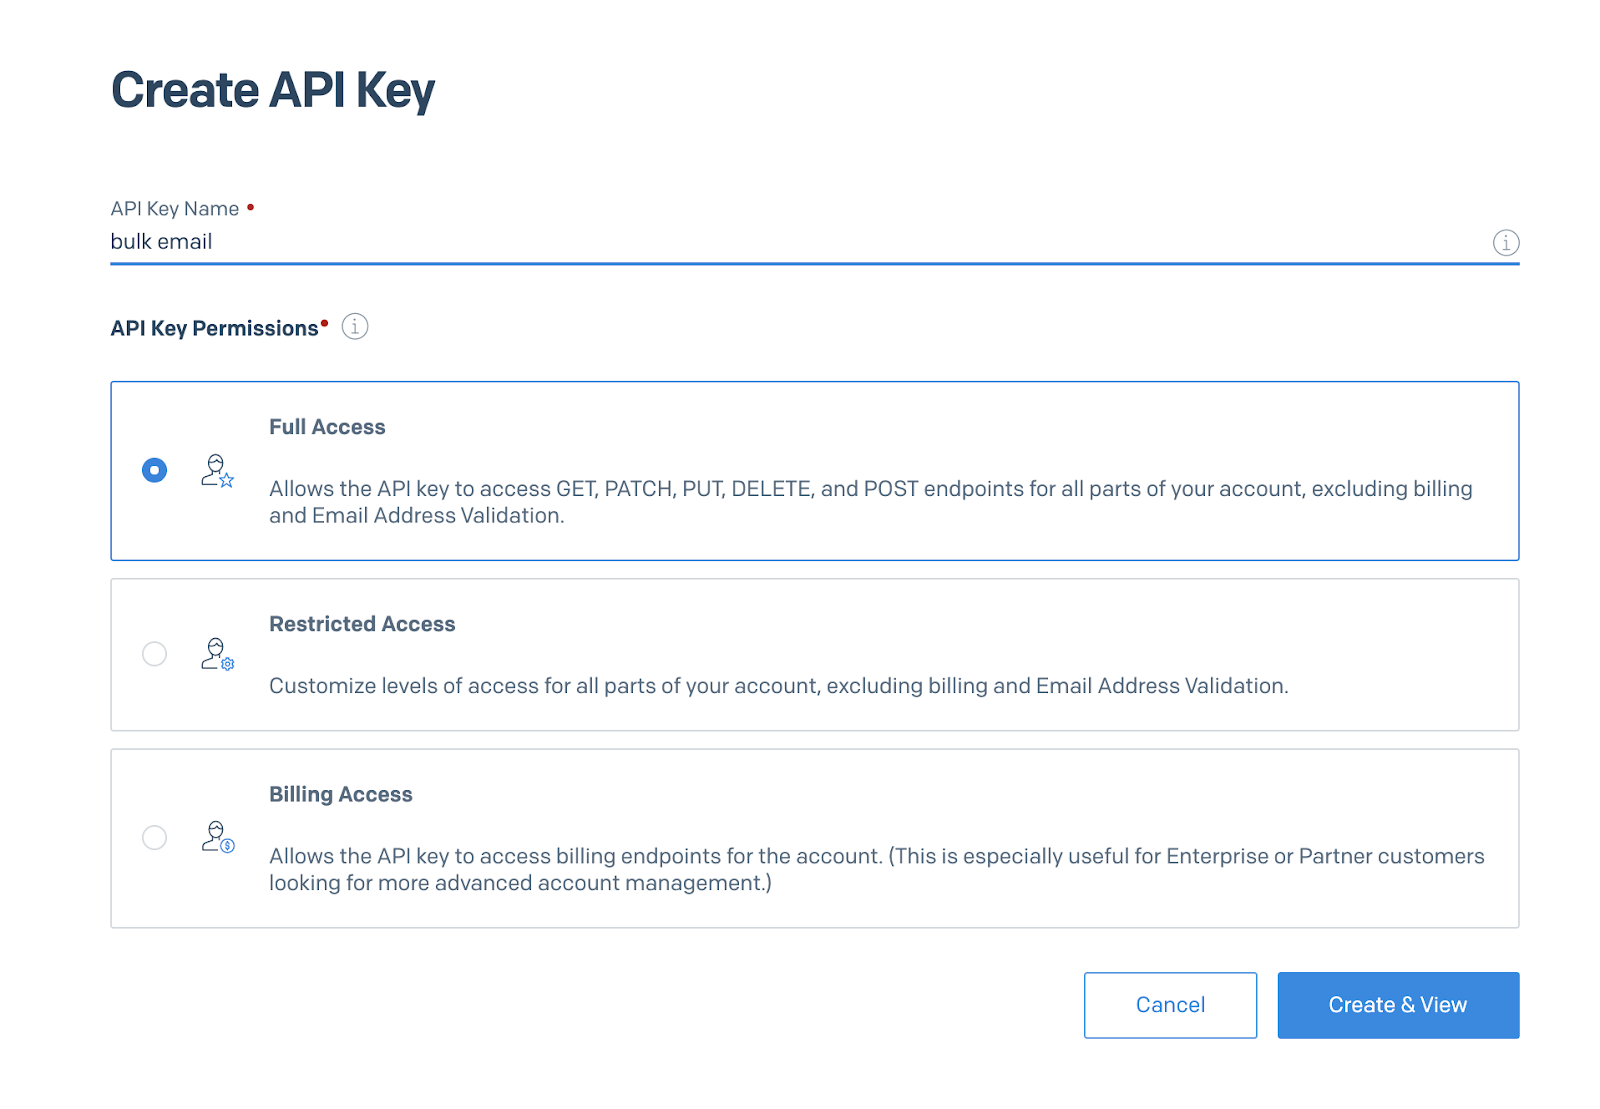 Screenshot of the UI for creating a SendGrid API key. The key is named "bulk email" and the permissions selected are "Full Access."